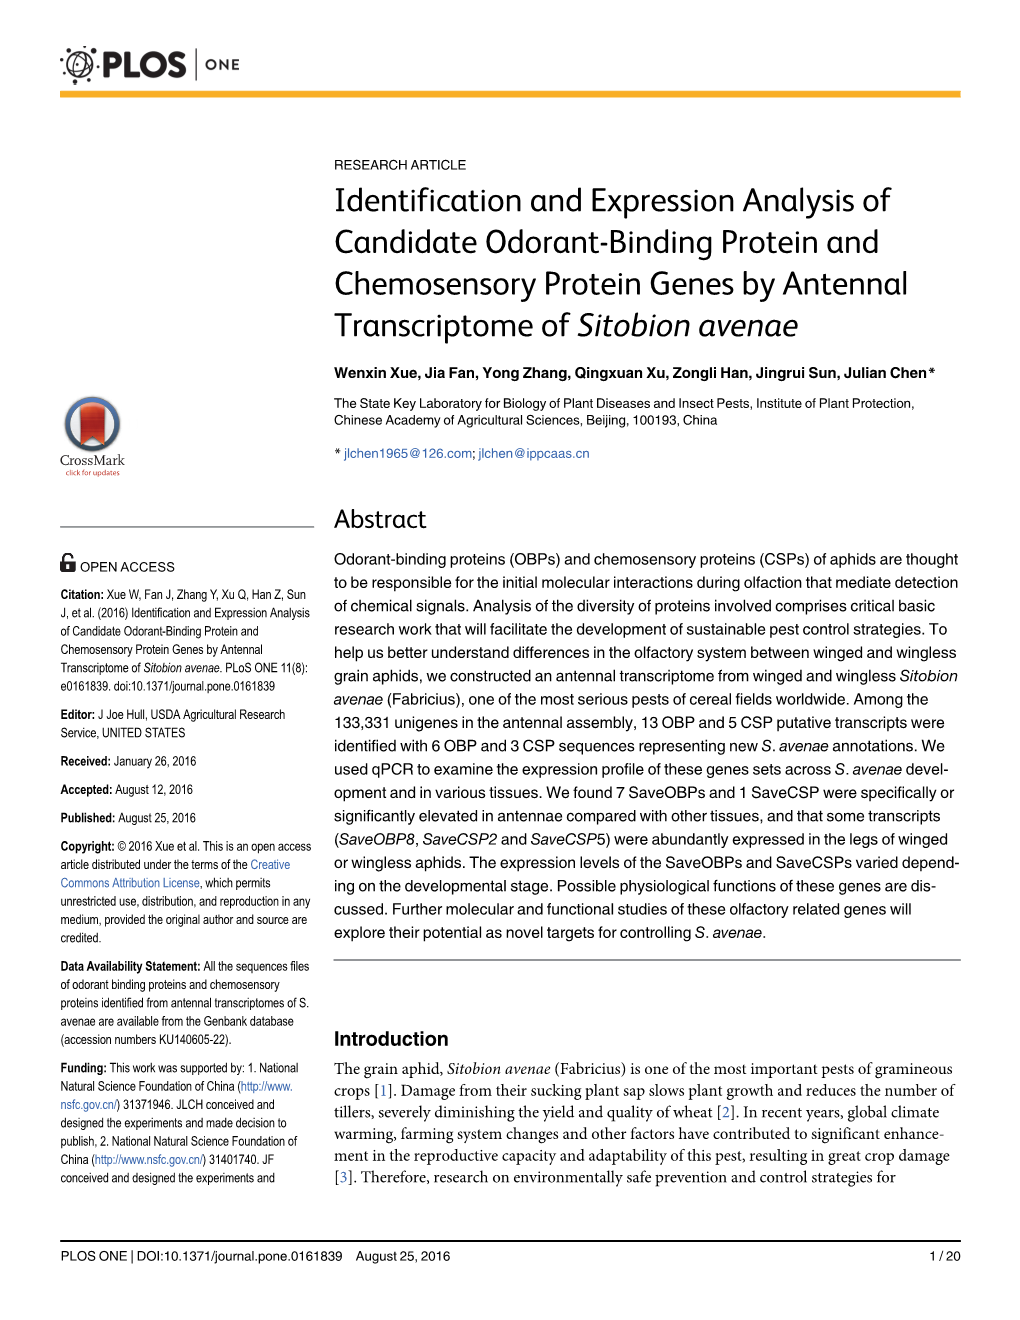 Identification and Expression Analysis of Candidate Odorant-Binding Protein and Chemosensory Protein Genes by Antennal Transcriptome of Sitobion Avenae